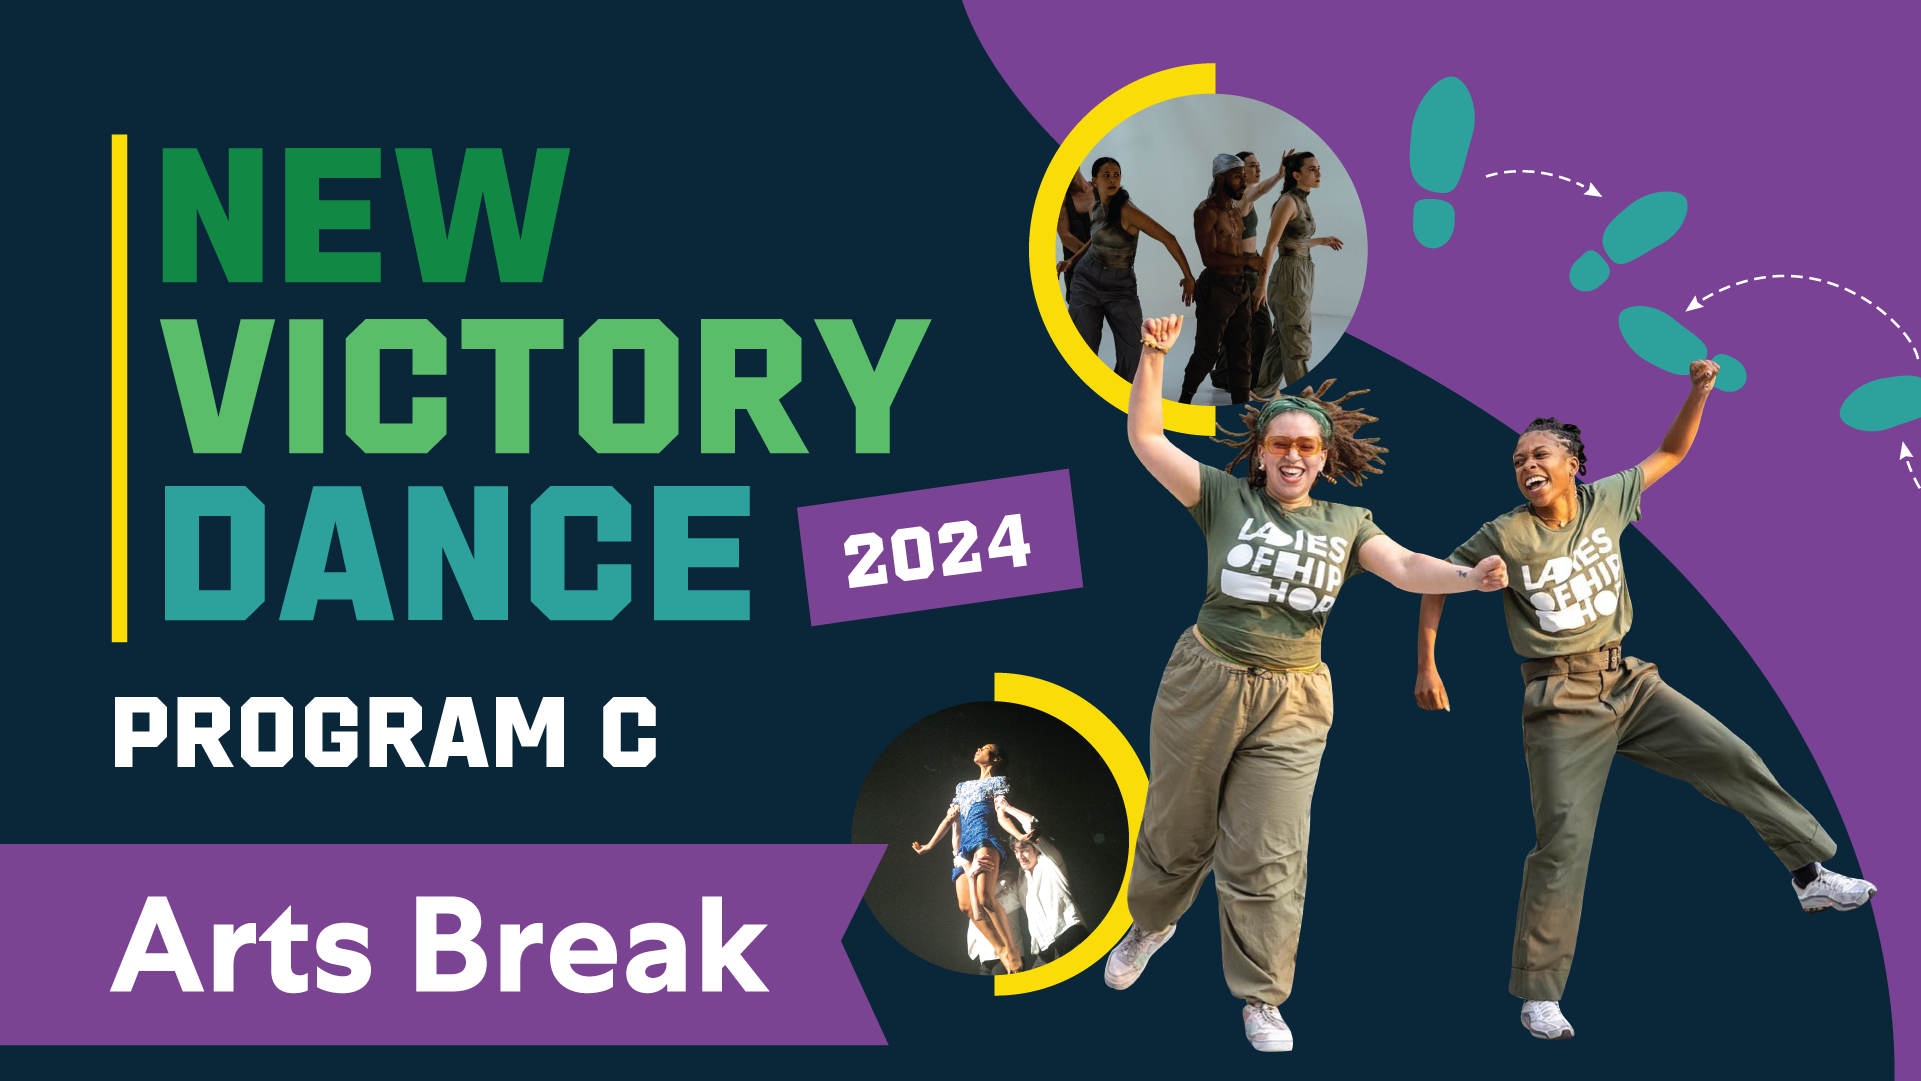 "New Victory Dance 2024 Arts Break: Program C" written in greens, teals and purples, surrounded by illustrated footsteps and photos of various dancers